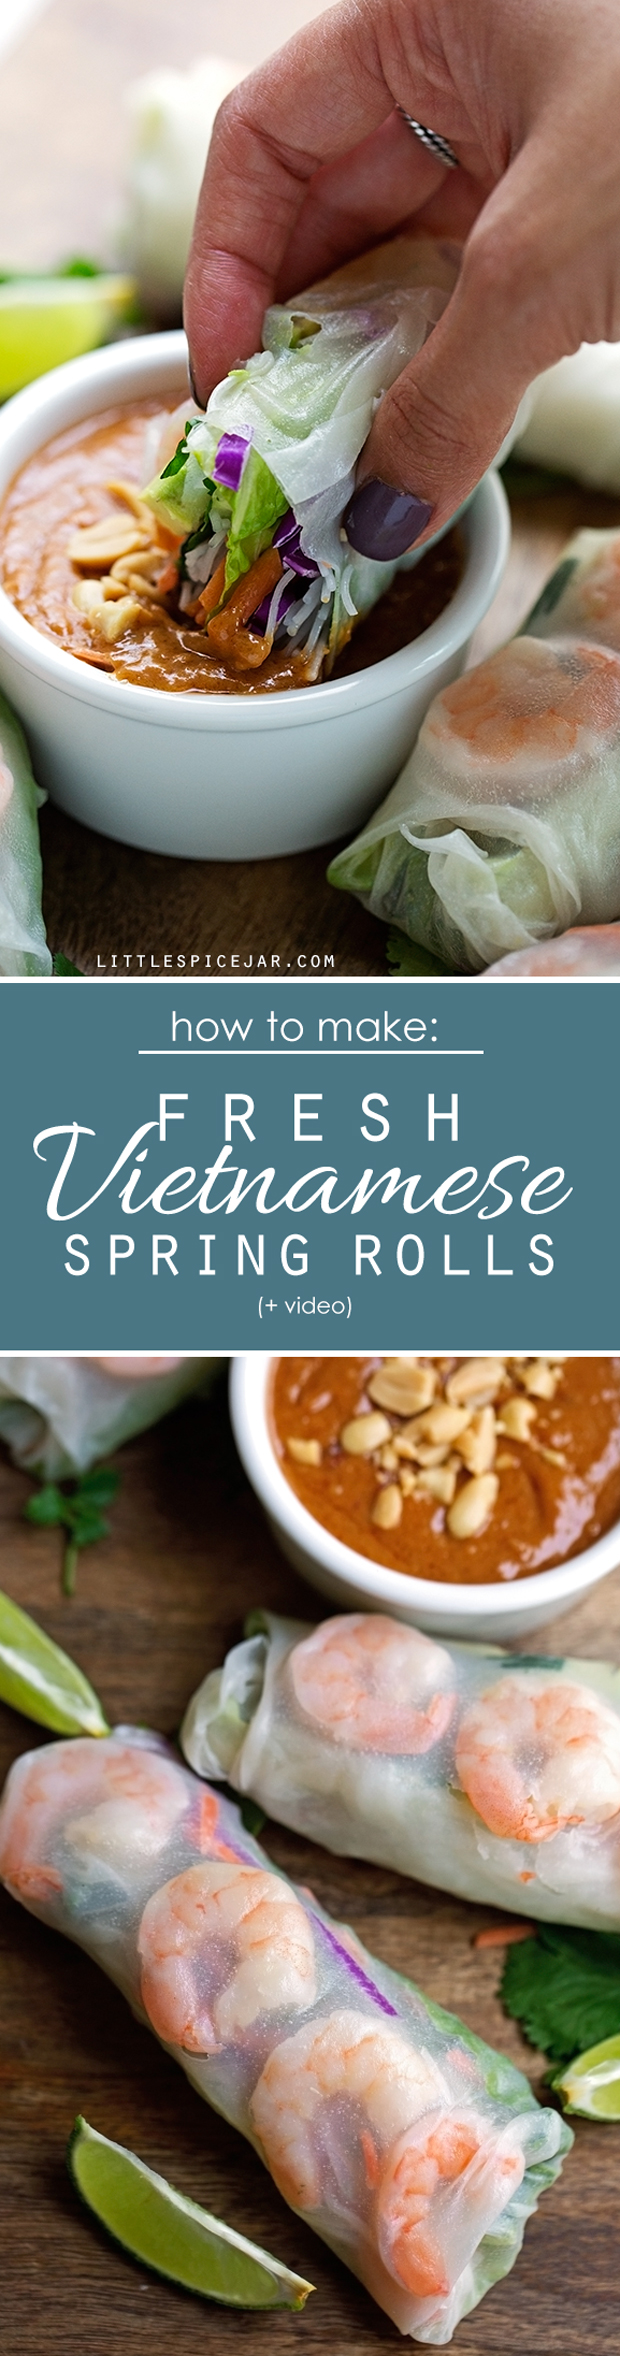 Vietnamese Fresh Spring Rolls - homemade spring rolls made easy! Watch the video and learn how to make these quickly and easily at home! #springrolls #freshspringrolls #summerrolls #vietnamesespringrolls | Littlespicejar.com